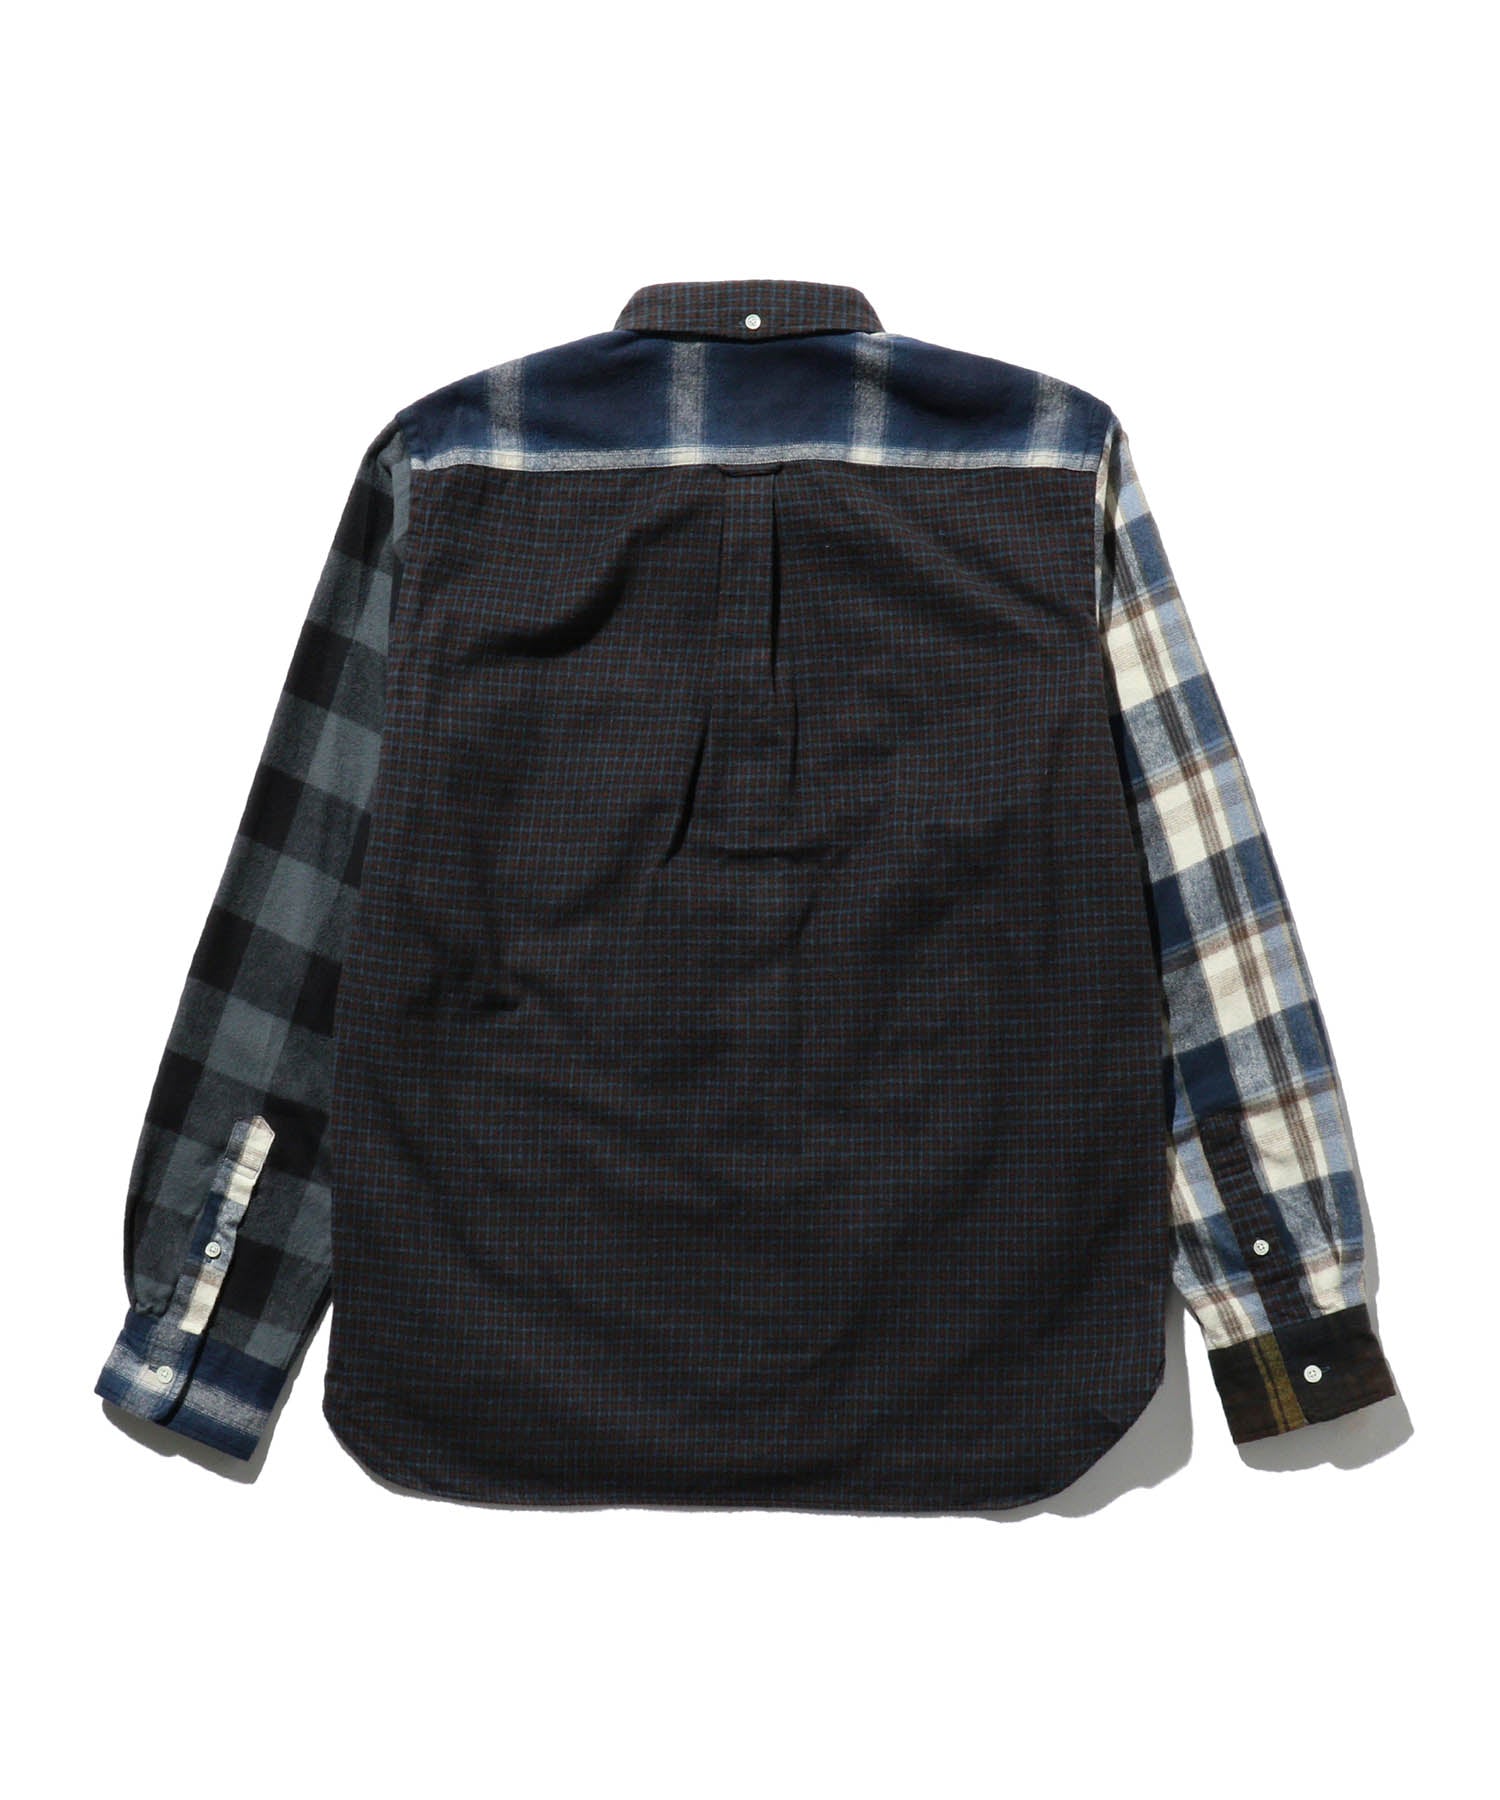 Beams Plus BD Flannel Check Panel Shirt Navy - Mildblend Supply Co